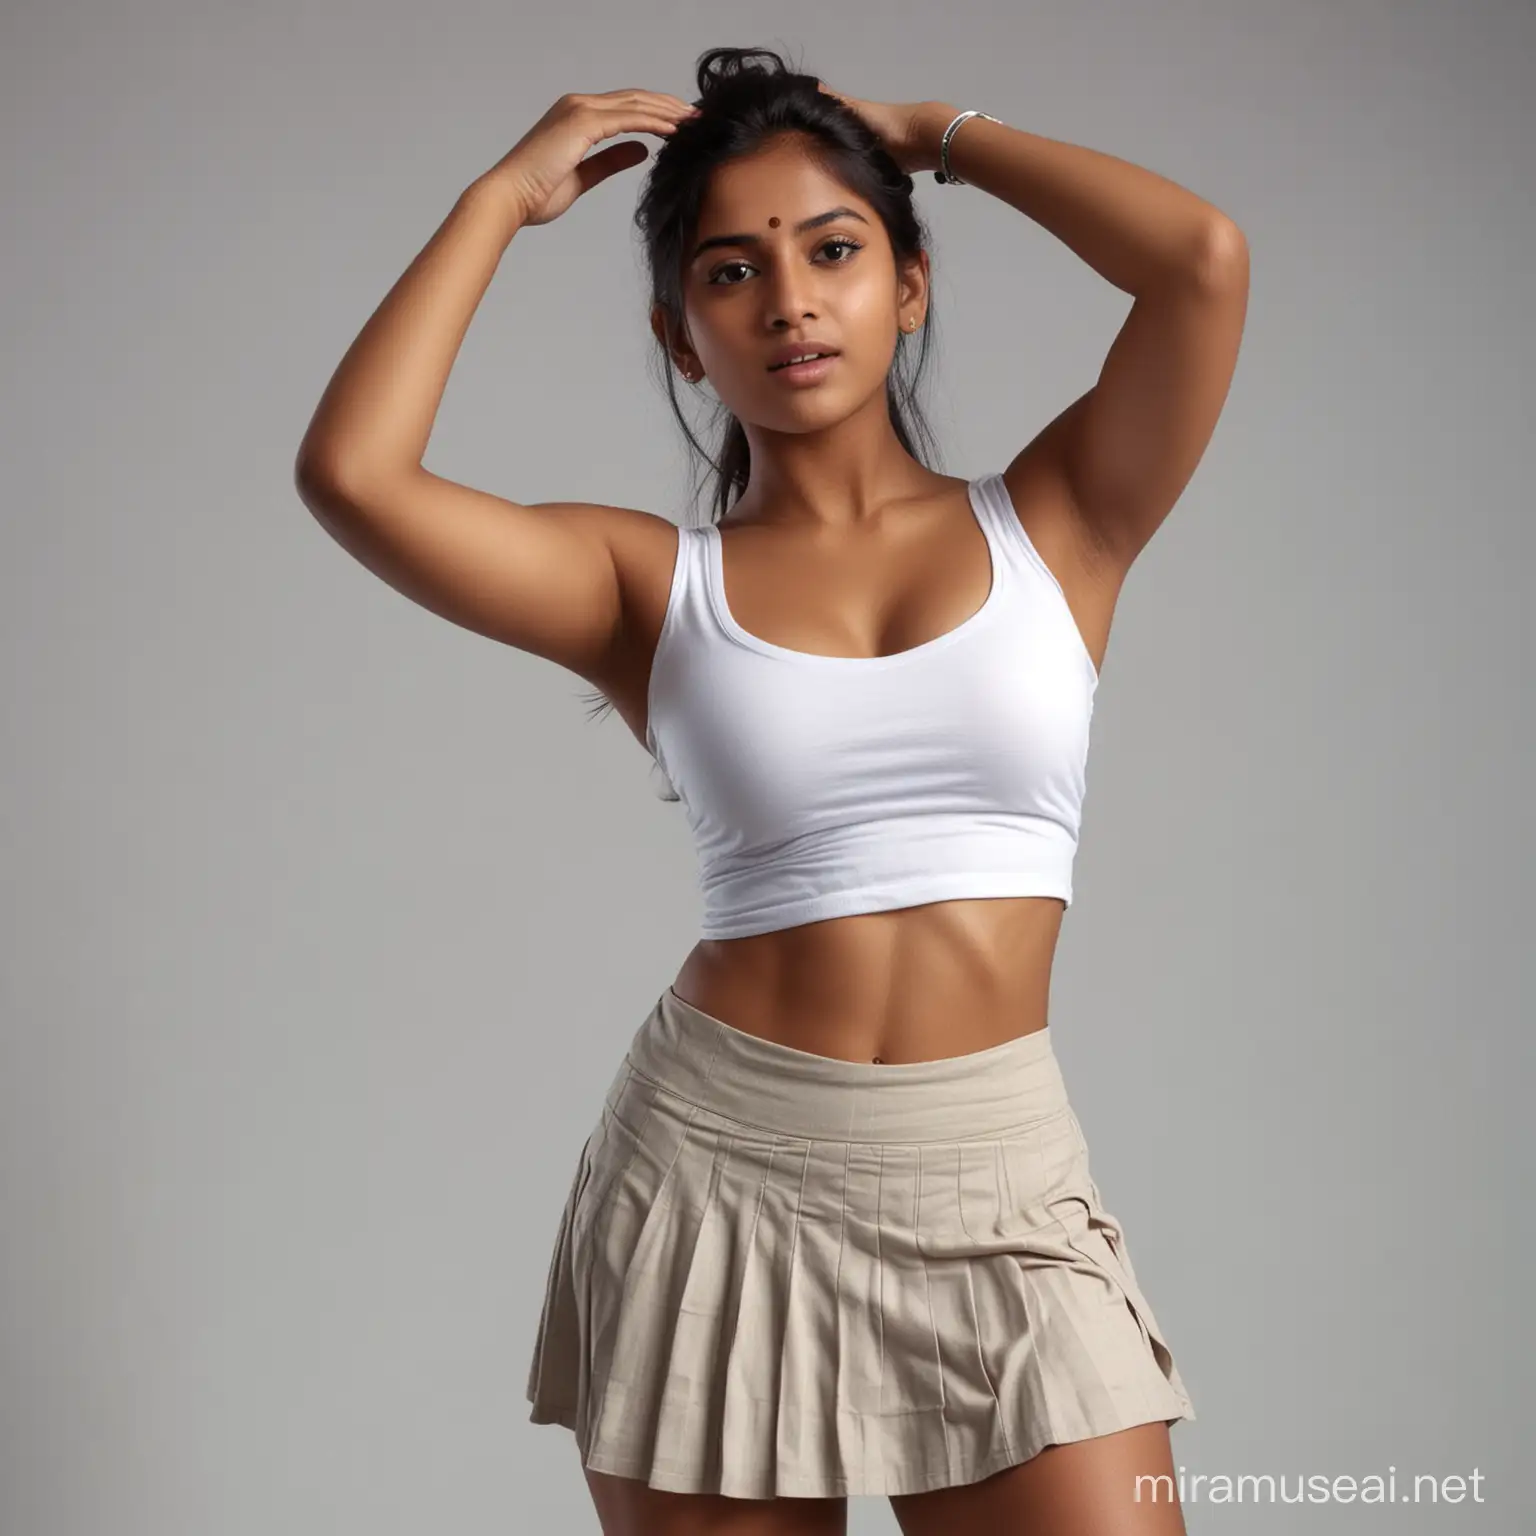 Stunning 18YearOld Indian Woman in White Tank Top and Skirt with Arms Raised